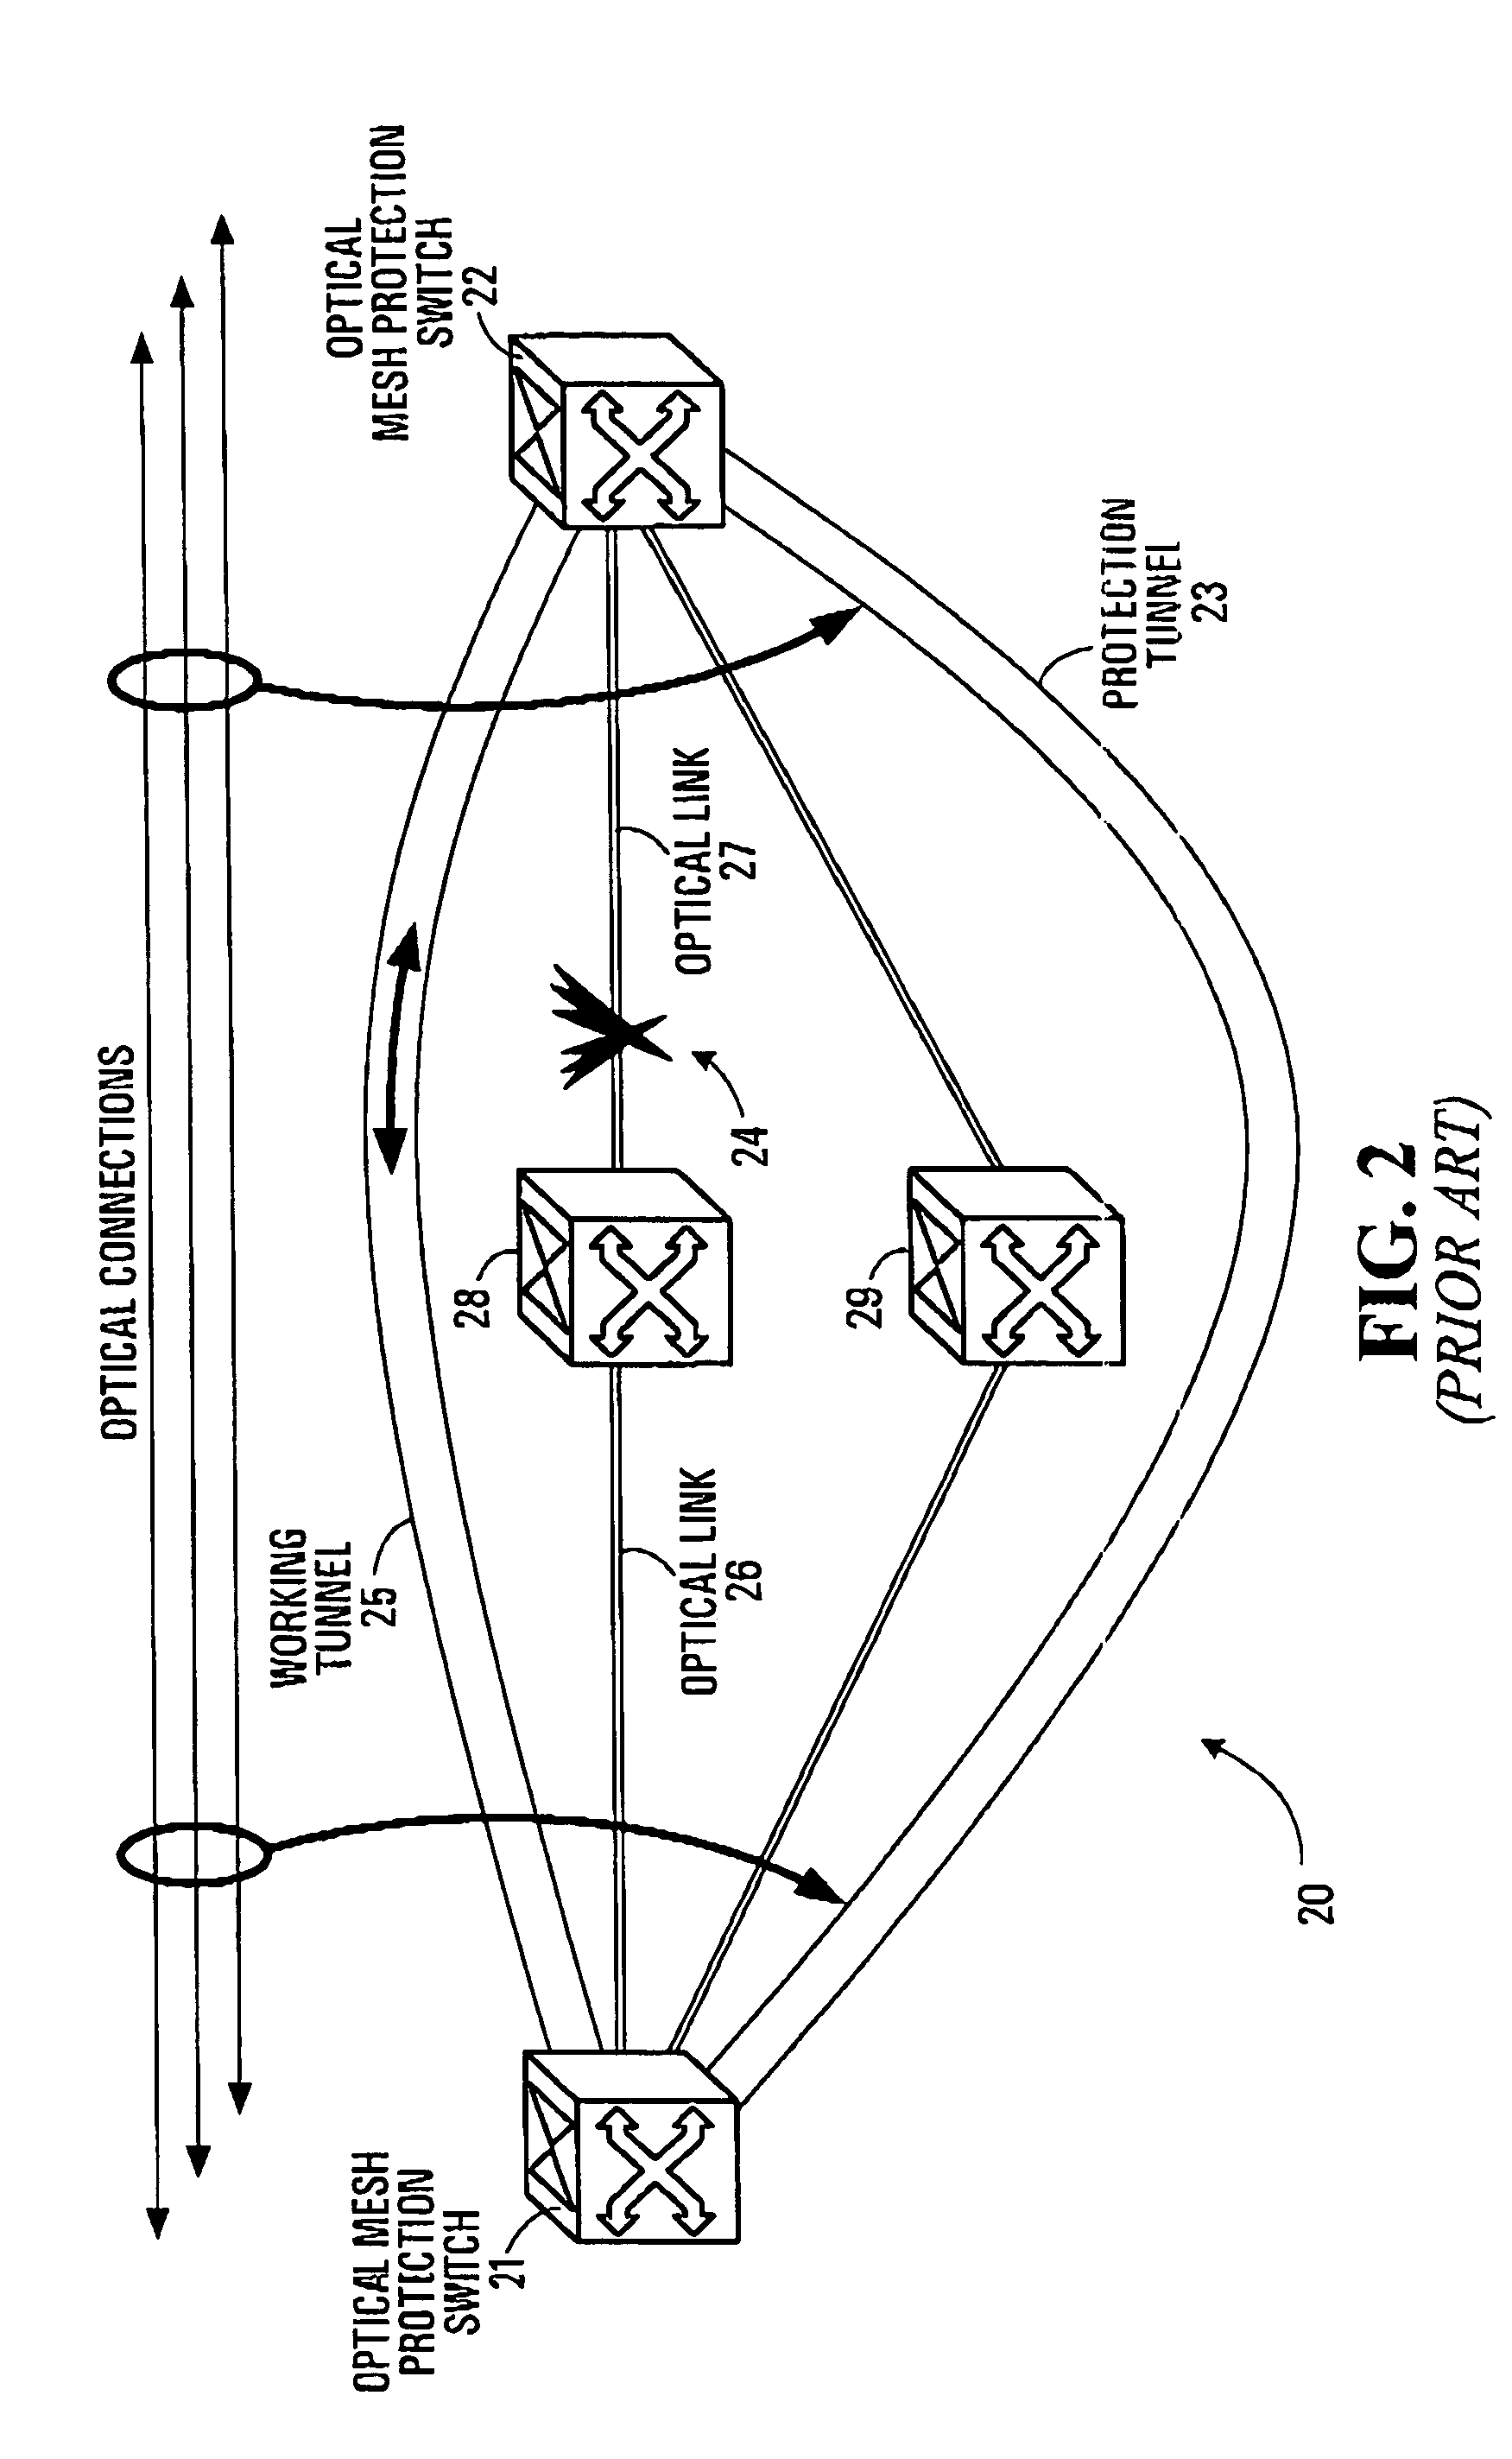 Methods for co-modelling and analyzing packet networks operating over optical networks